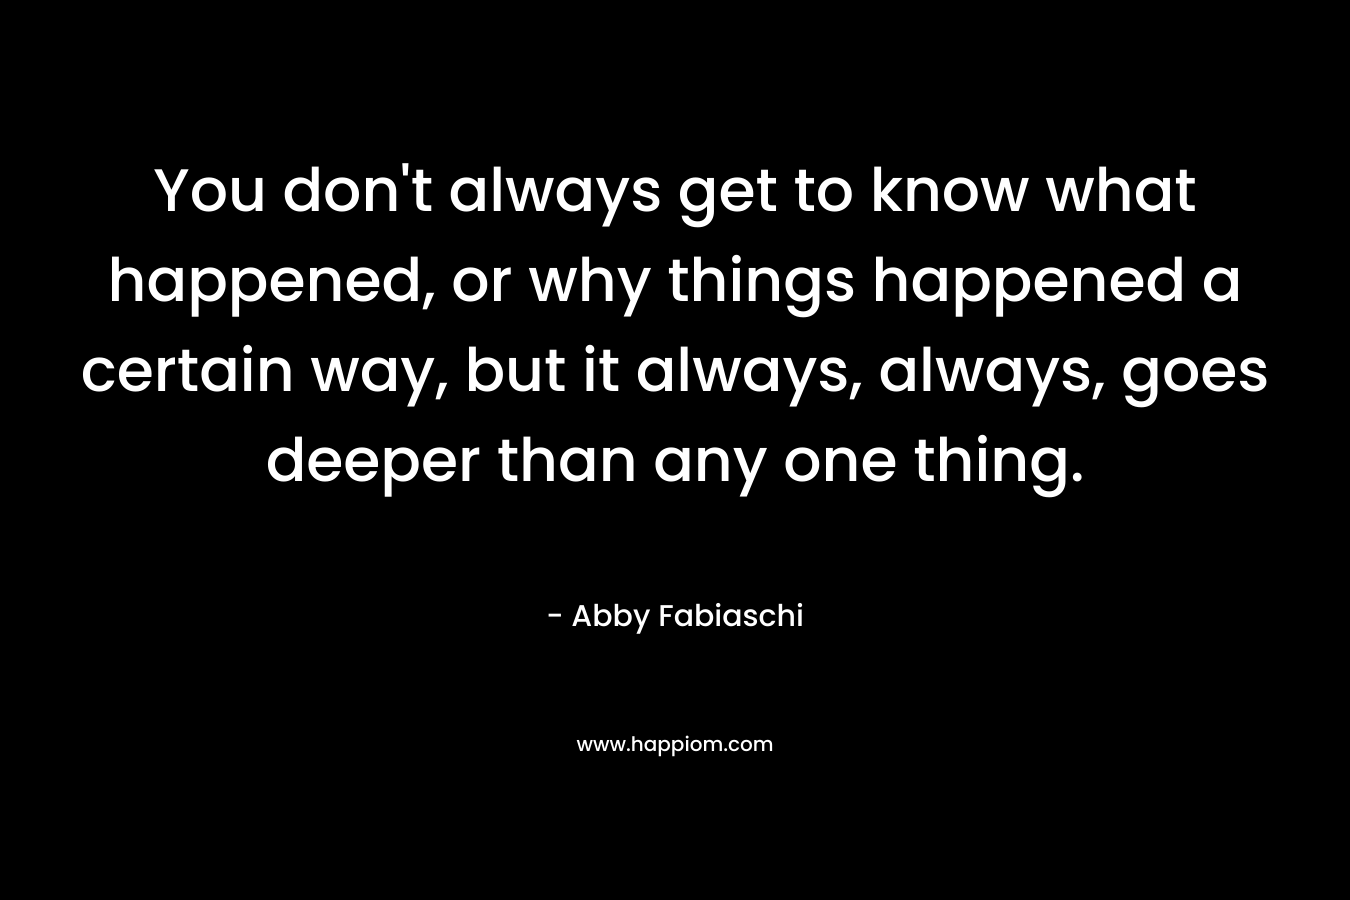 You don't always get to know what happened, or why things happened a certain way, but it always, always, goes deeper than any one thing.